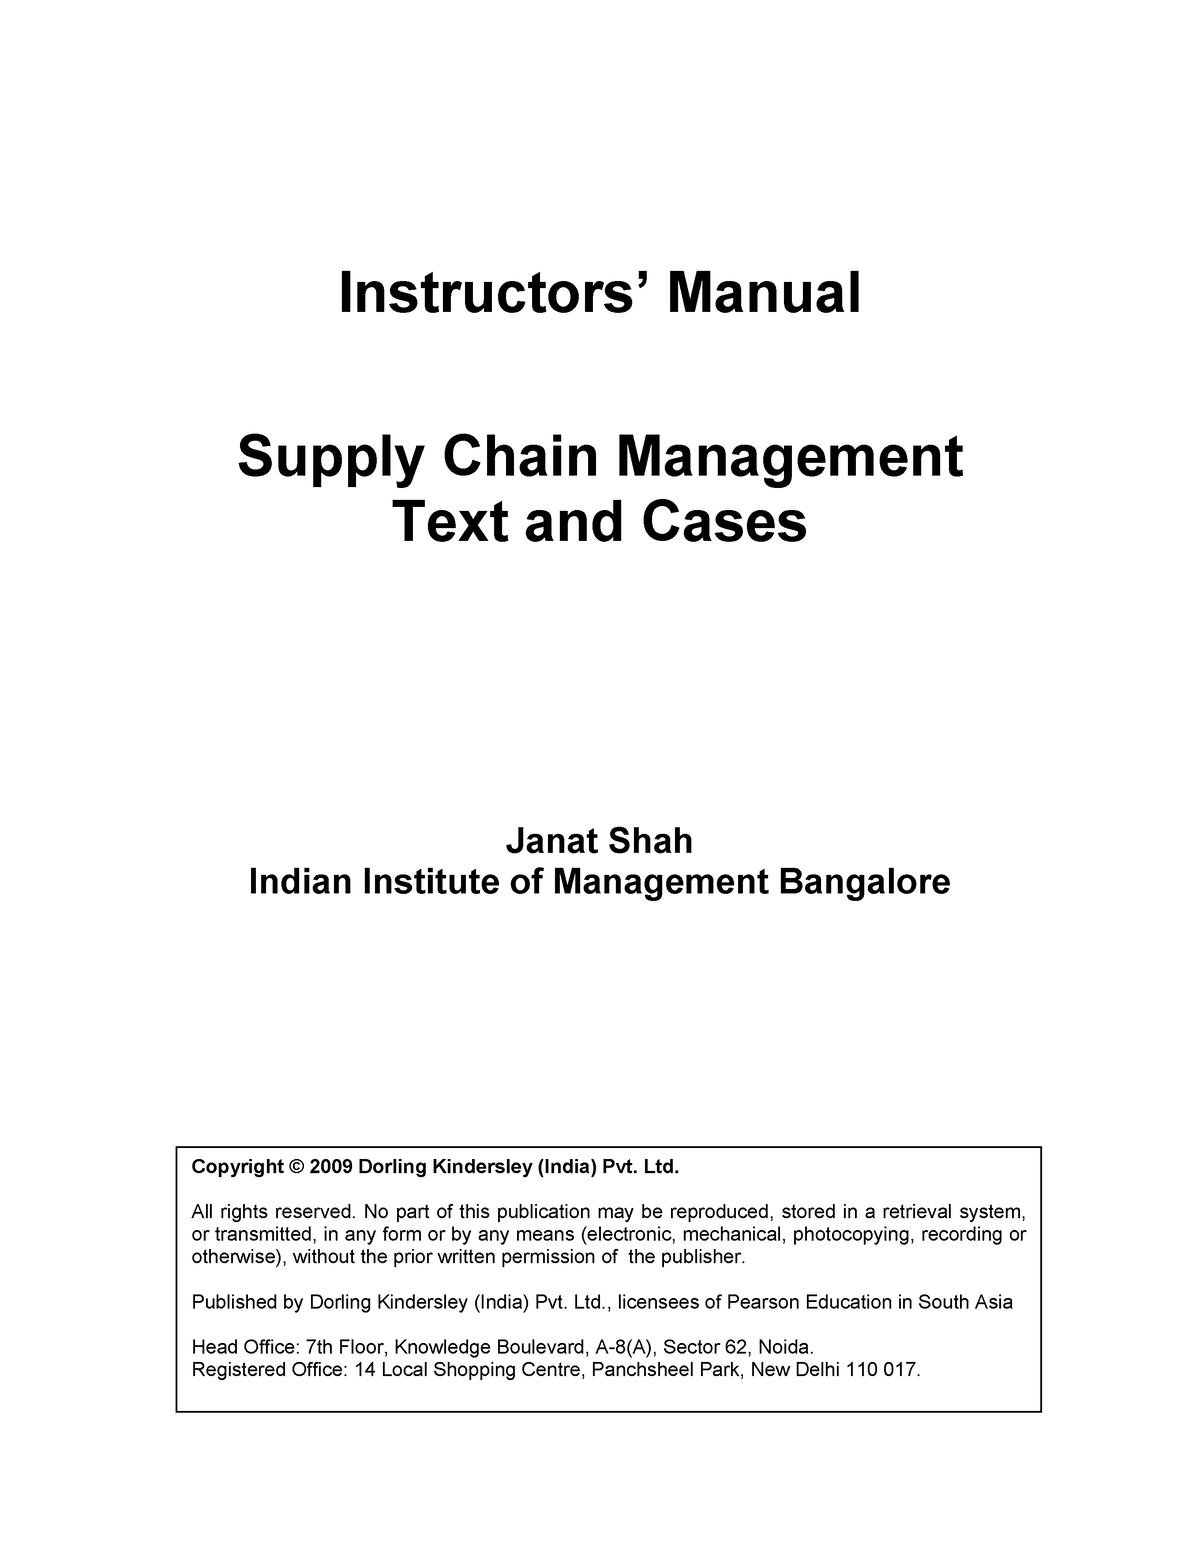 thesis for supply chain management